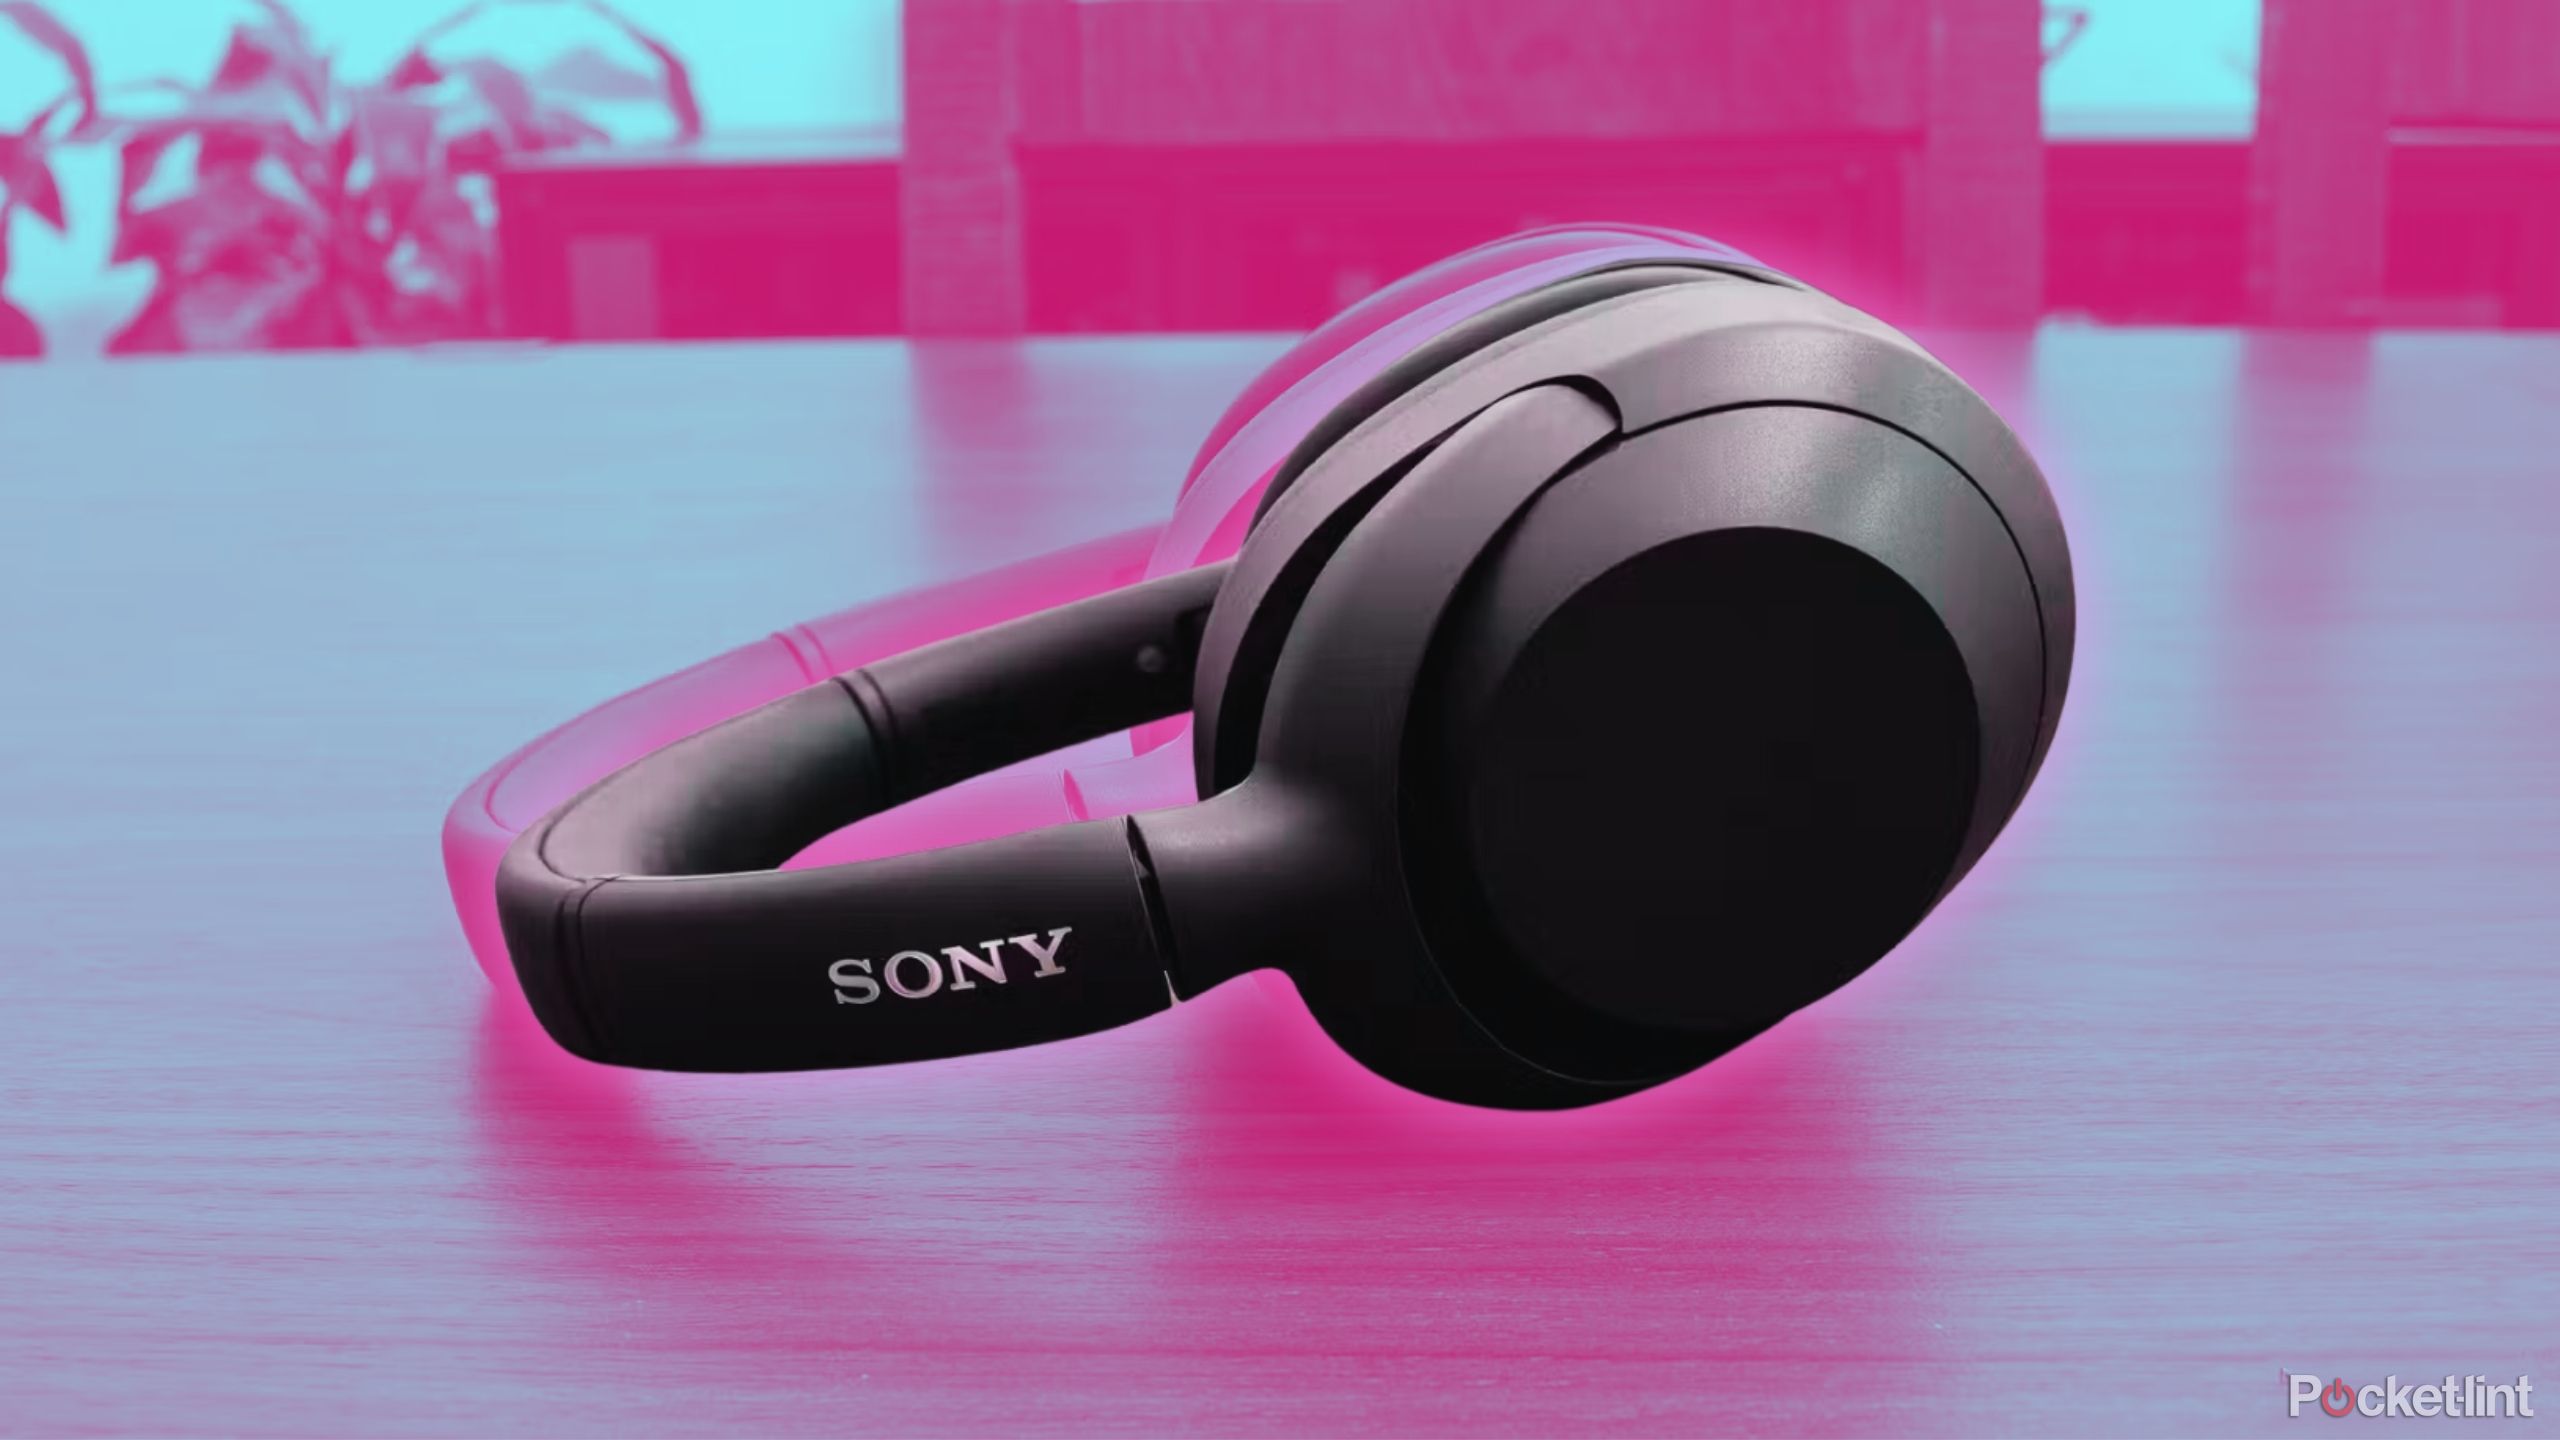 Sony Ult Wear review: My new travel go-to